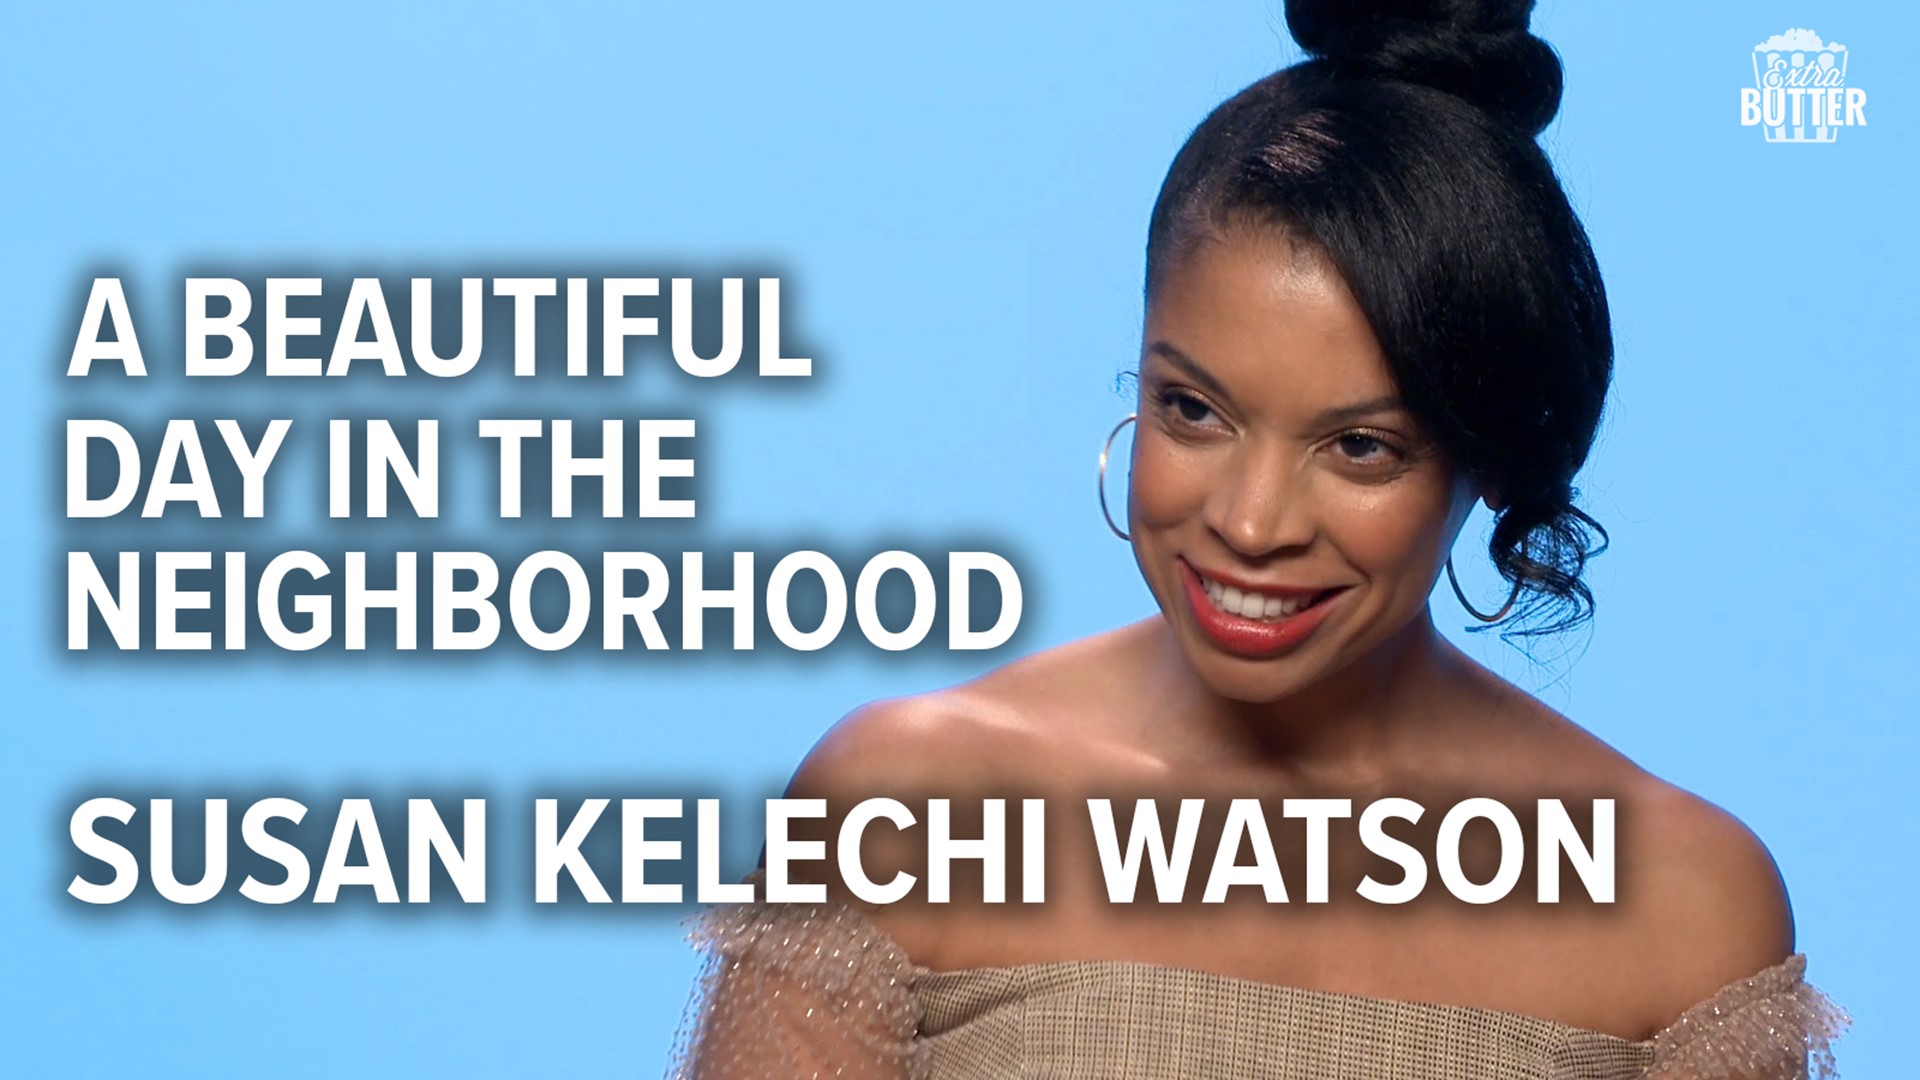 Susan Kelechi Watson talks about why she wanted to be a part of the movie 'A Beautiful Day in the Neighborhood.' Susan says the story was very personal.